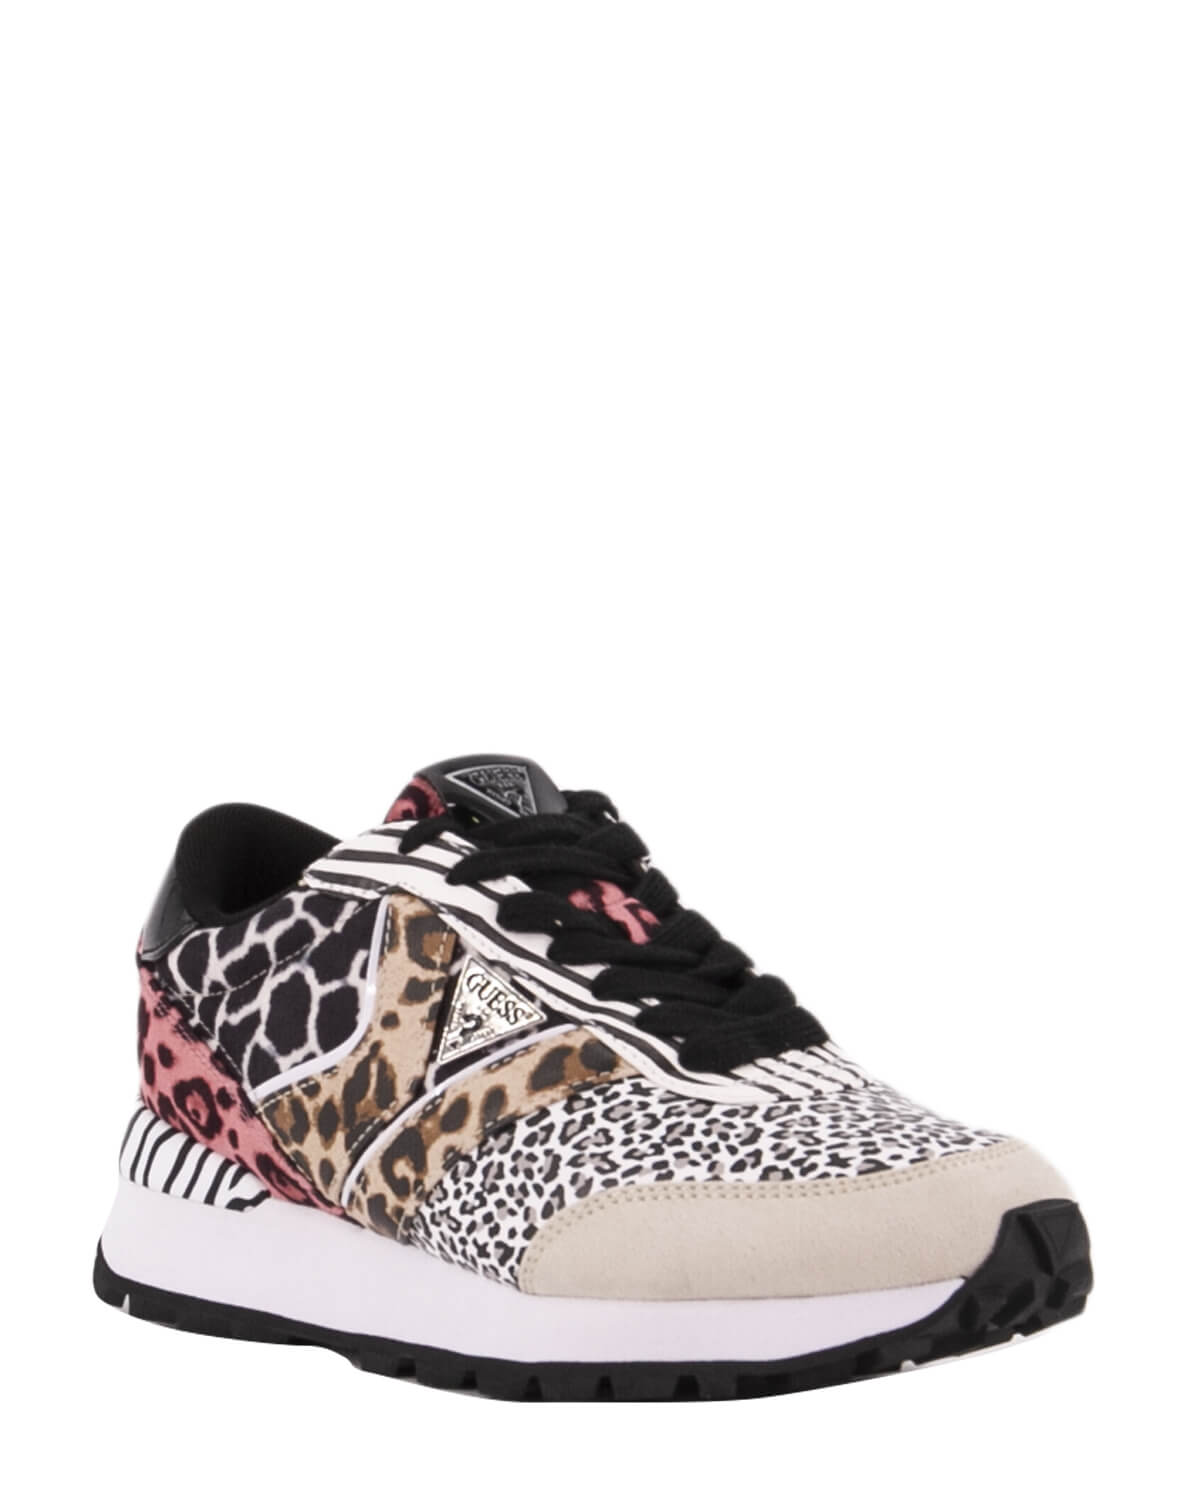 SNEAKERS GUESS SAMSIN4 ACTIVE LADY